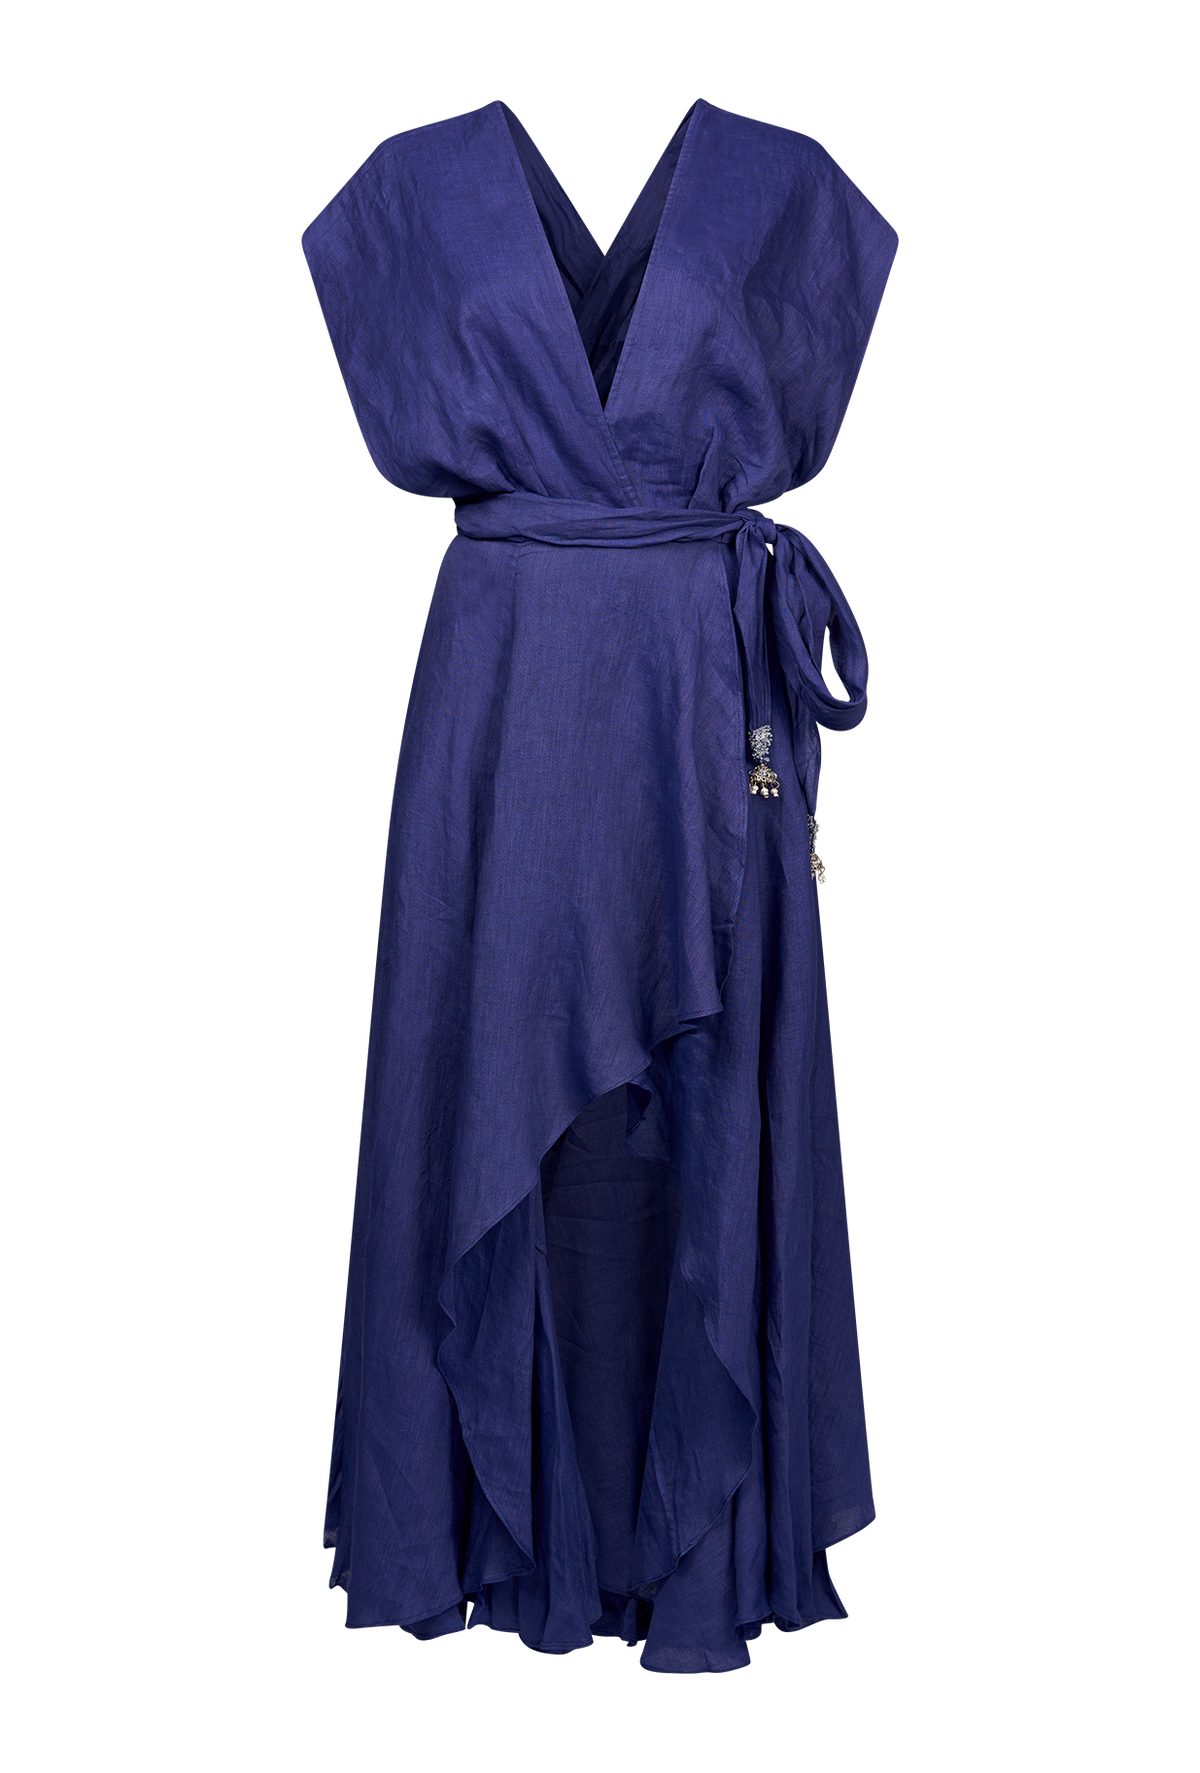 Navy linen dress with wrap front and bodice with V neck that wraps over the shoulders and crosses at the back and around the waist